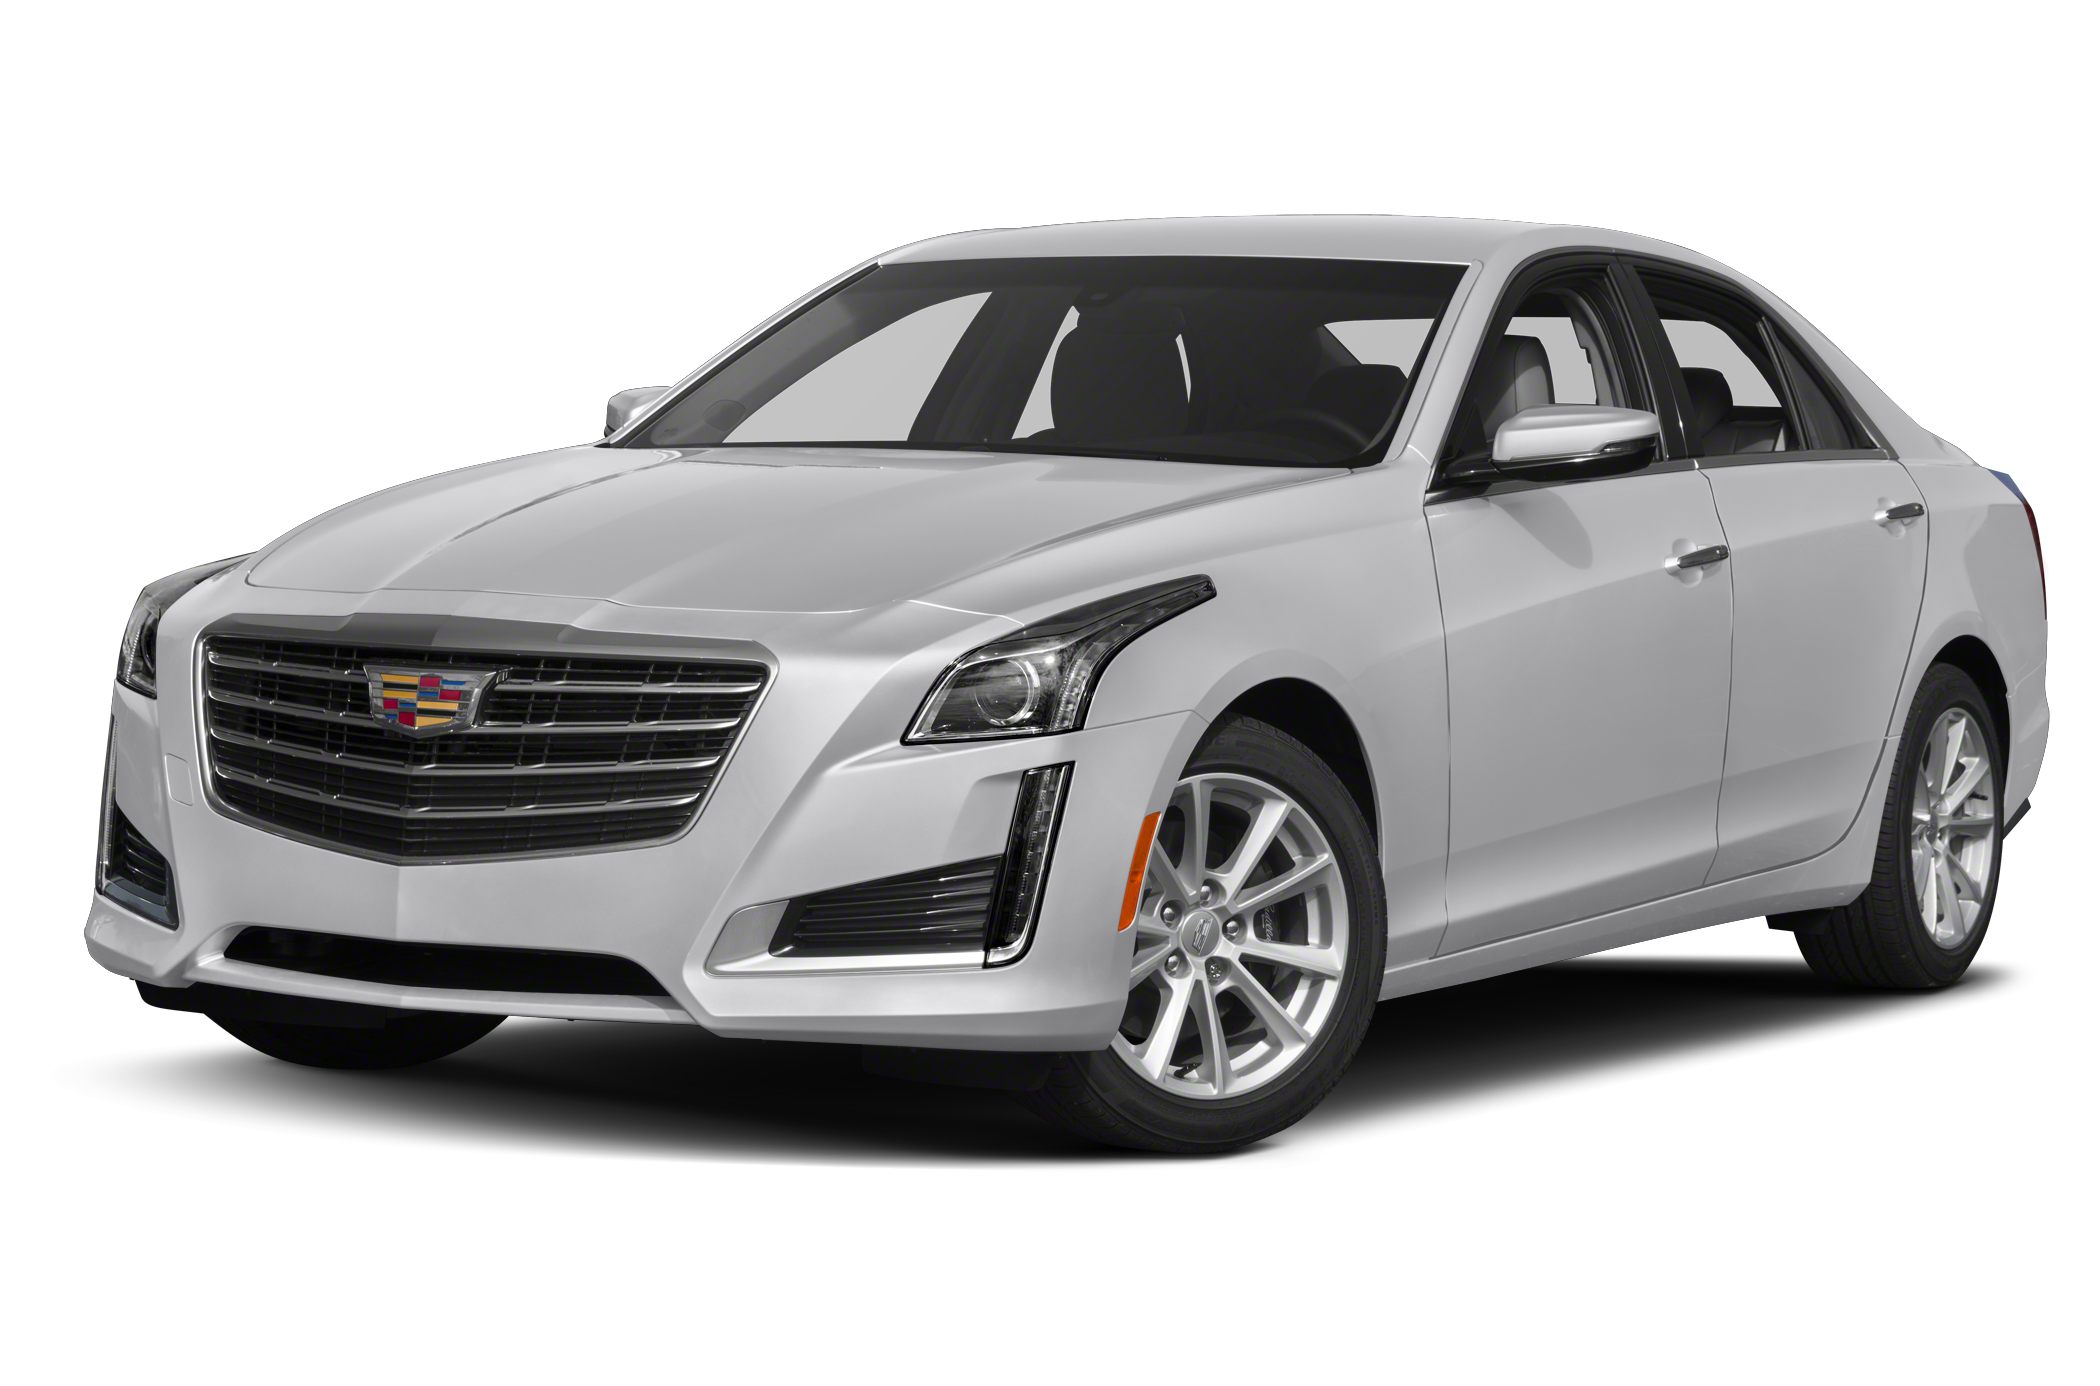 2019 Cadillac Cts 3 6l Premium Luxury 4dr All Wheel Drive Sedan Pictures